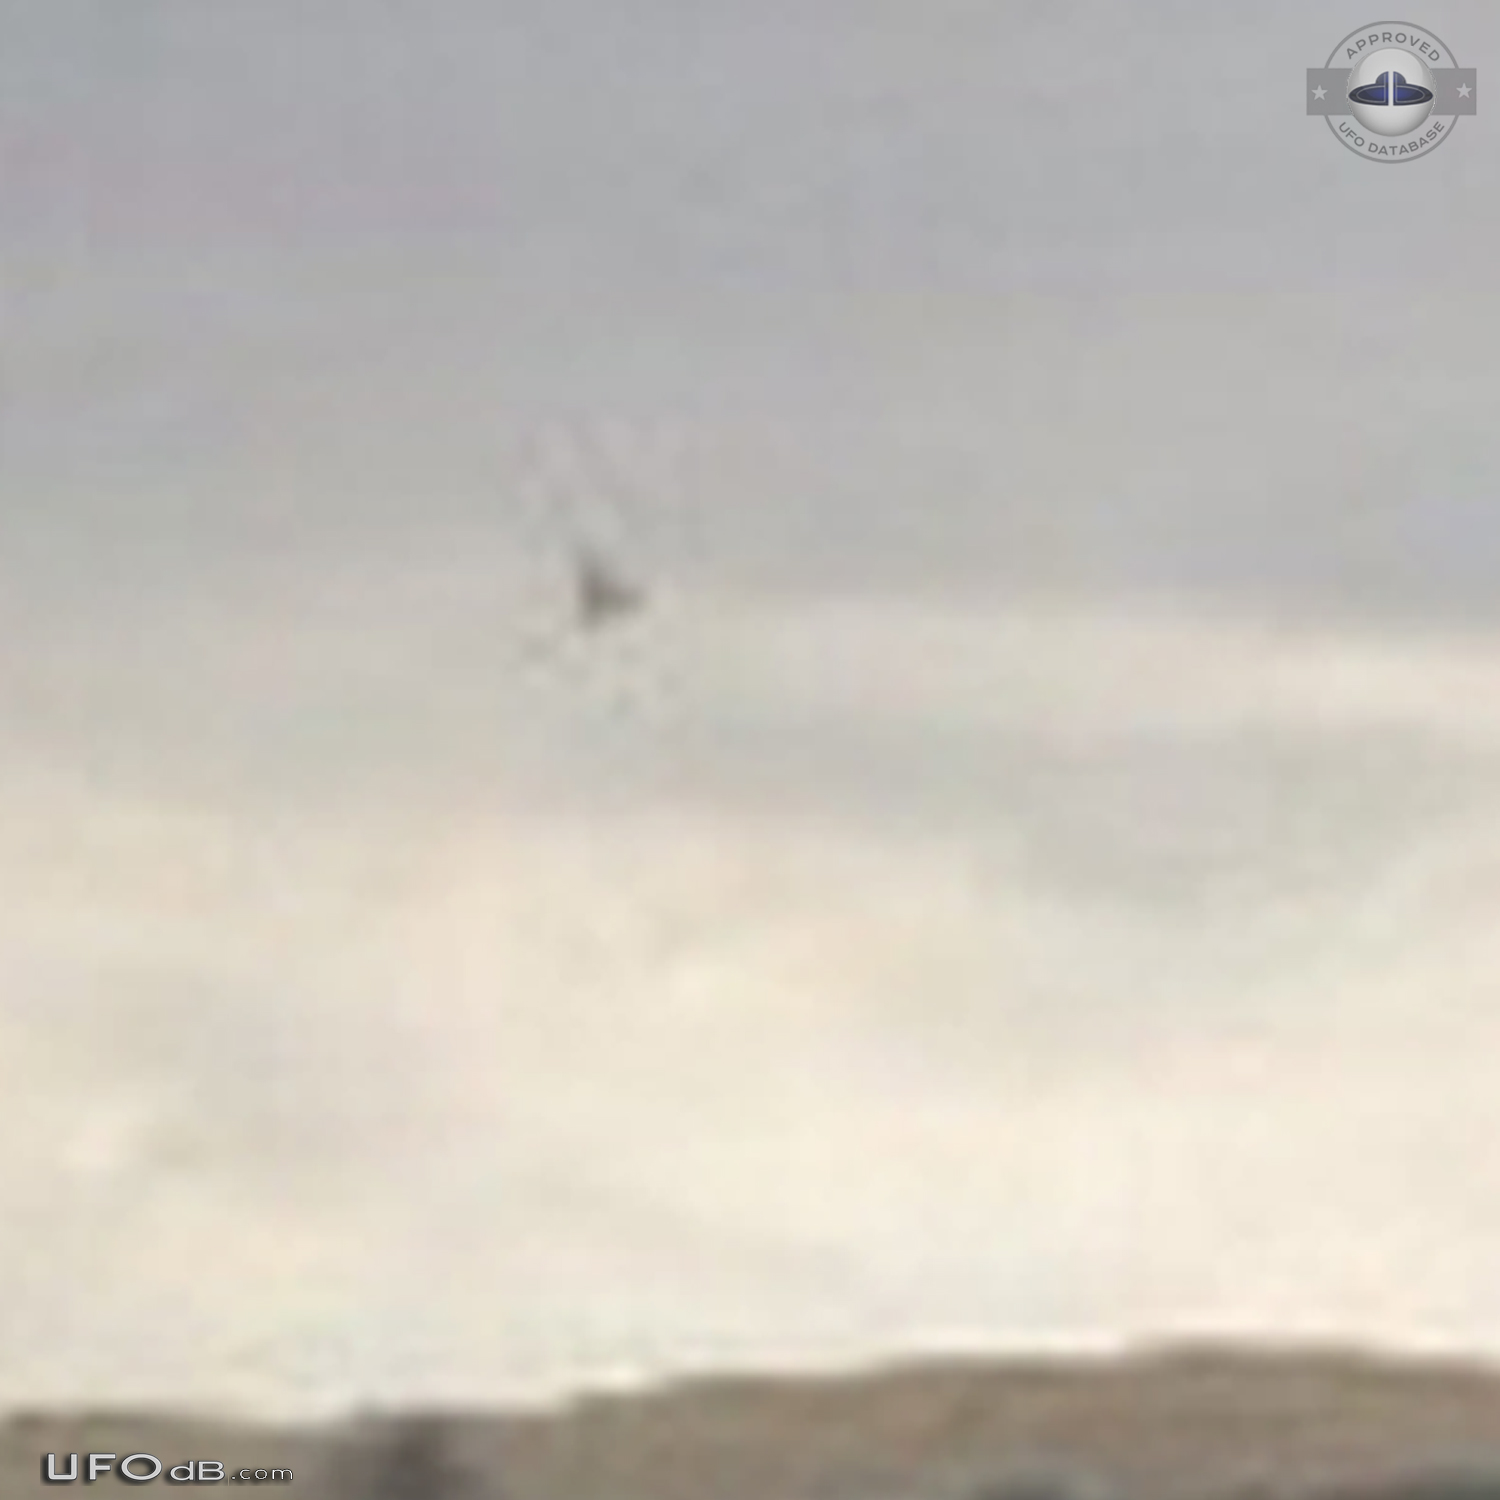 Picture reveal Triangular UFO on the left of a Pyramid in Egypt - 2011 UFO Picture #657-6